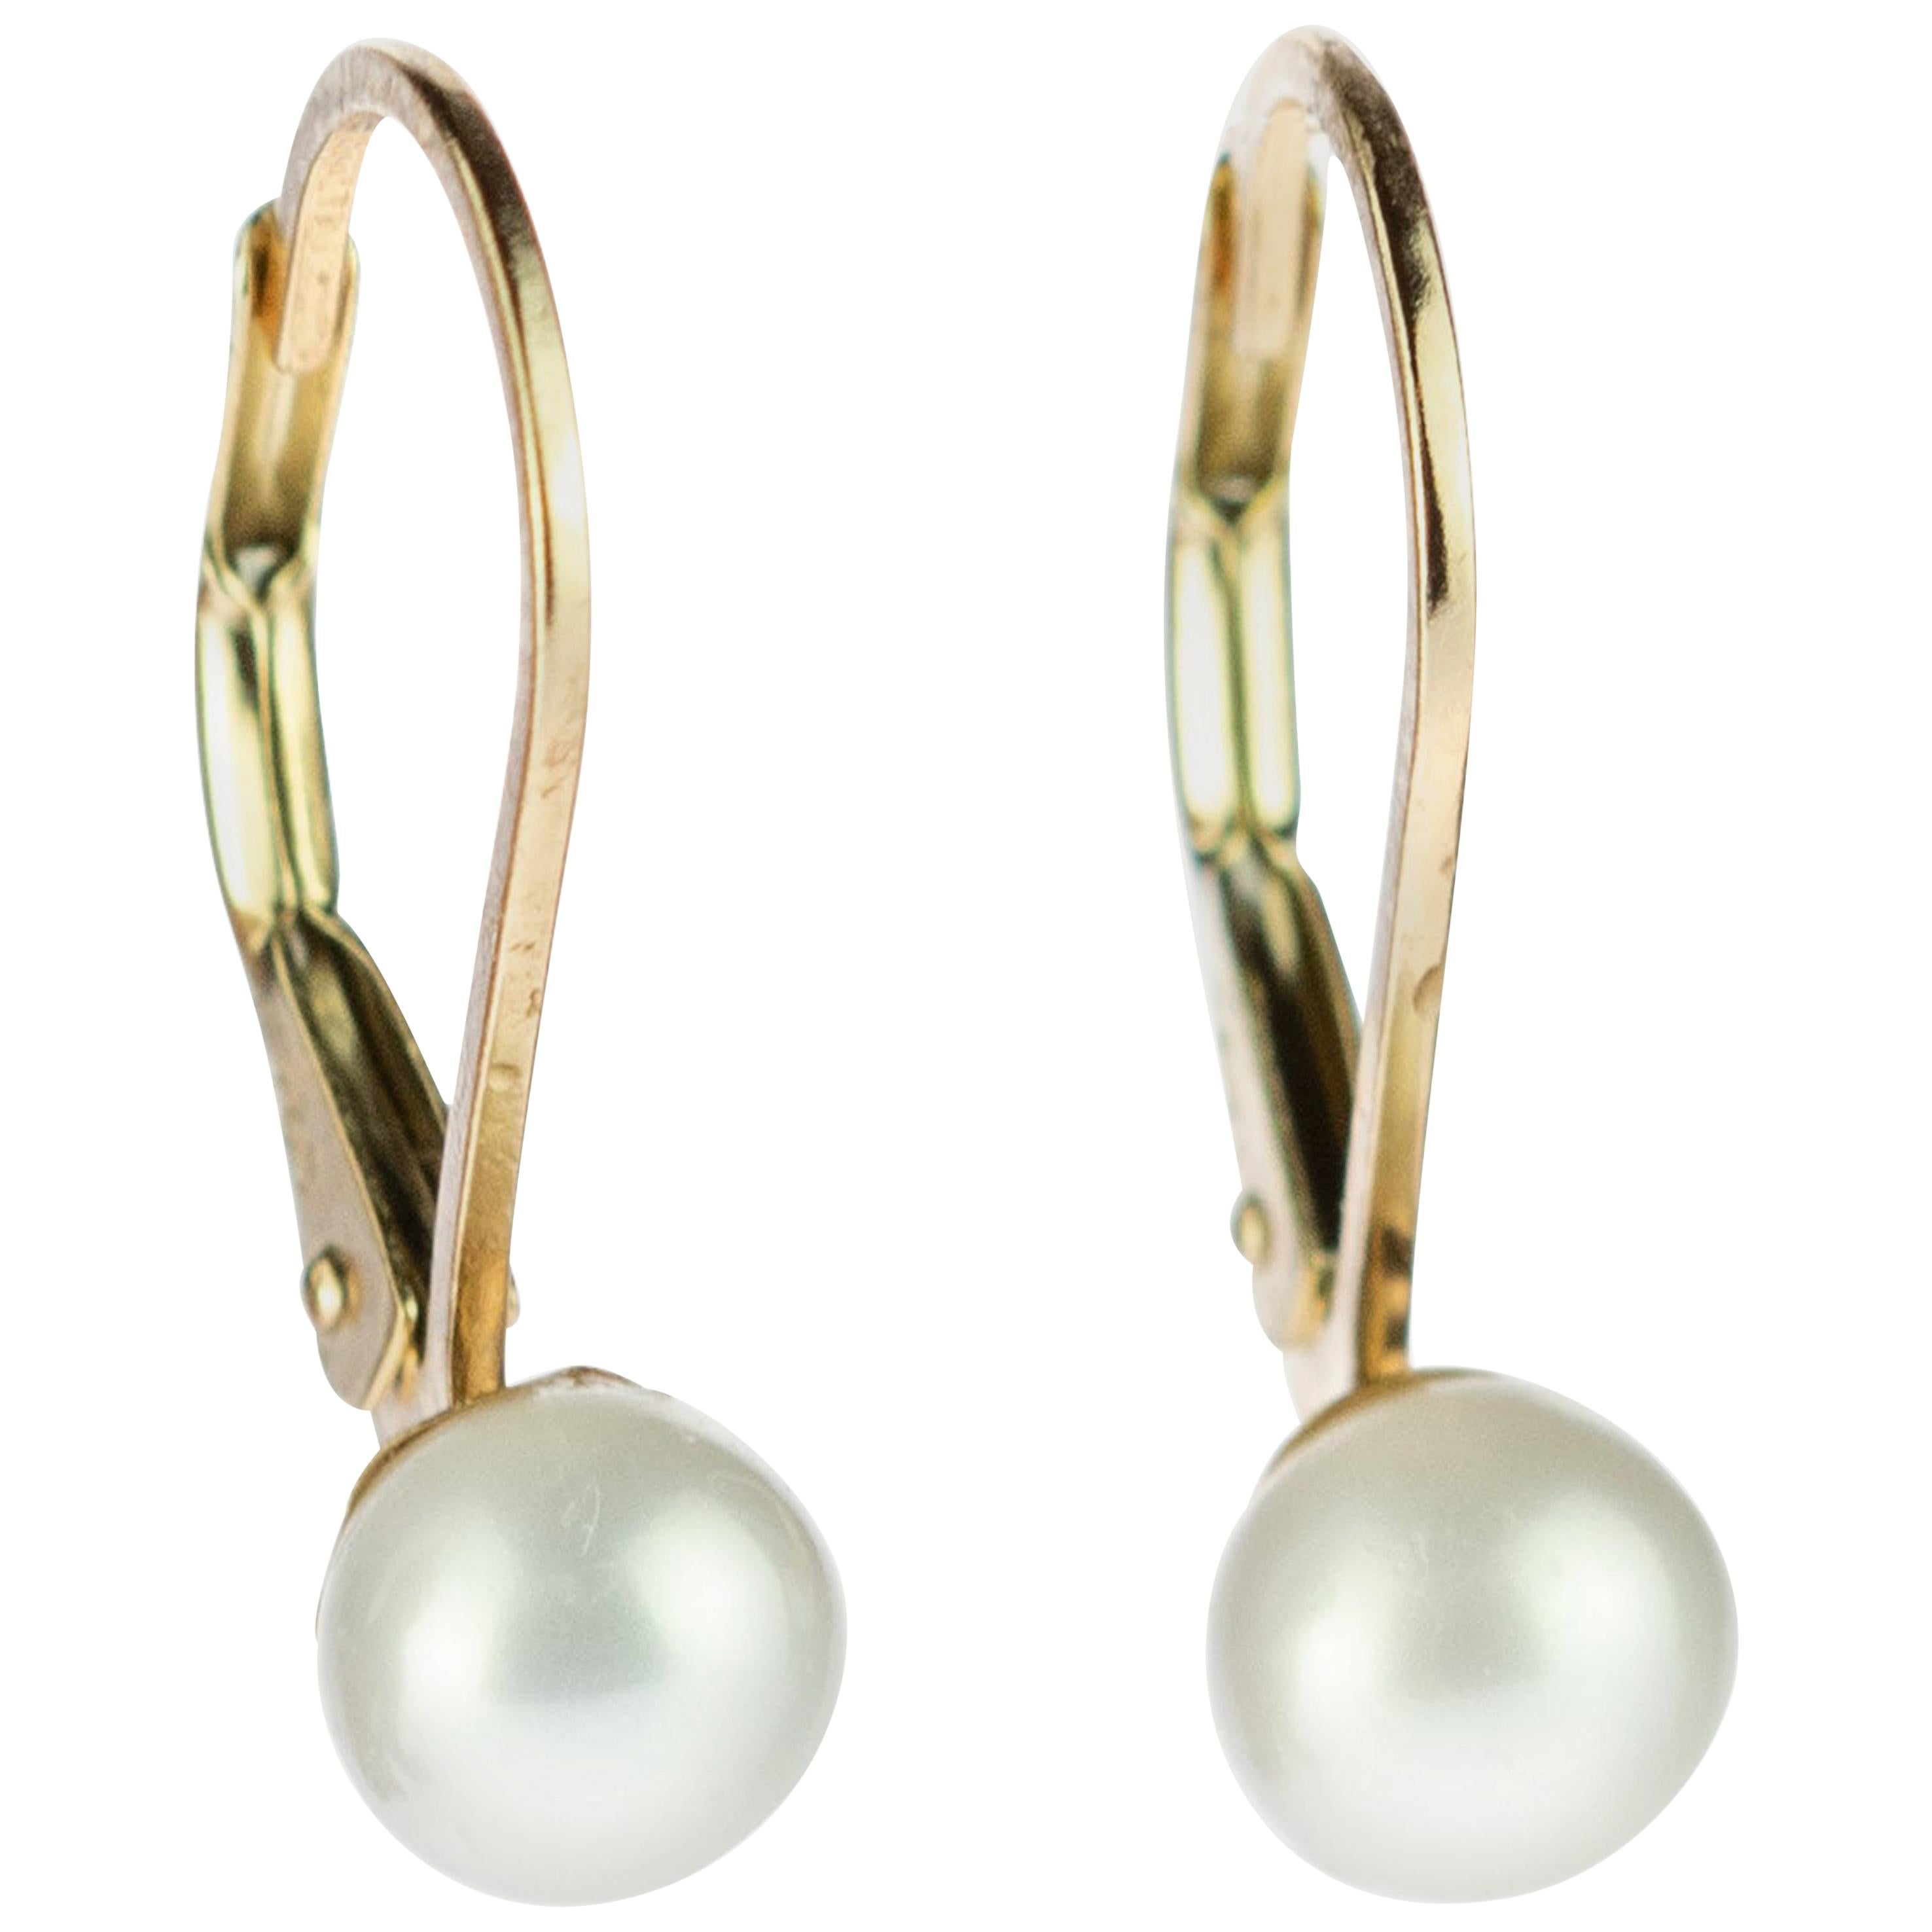 SOLID 18K YELLOW GOLD EARRINGS WITH WHITE FW PEARL AND SAPPHIRE MADE IN ITALY